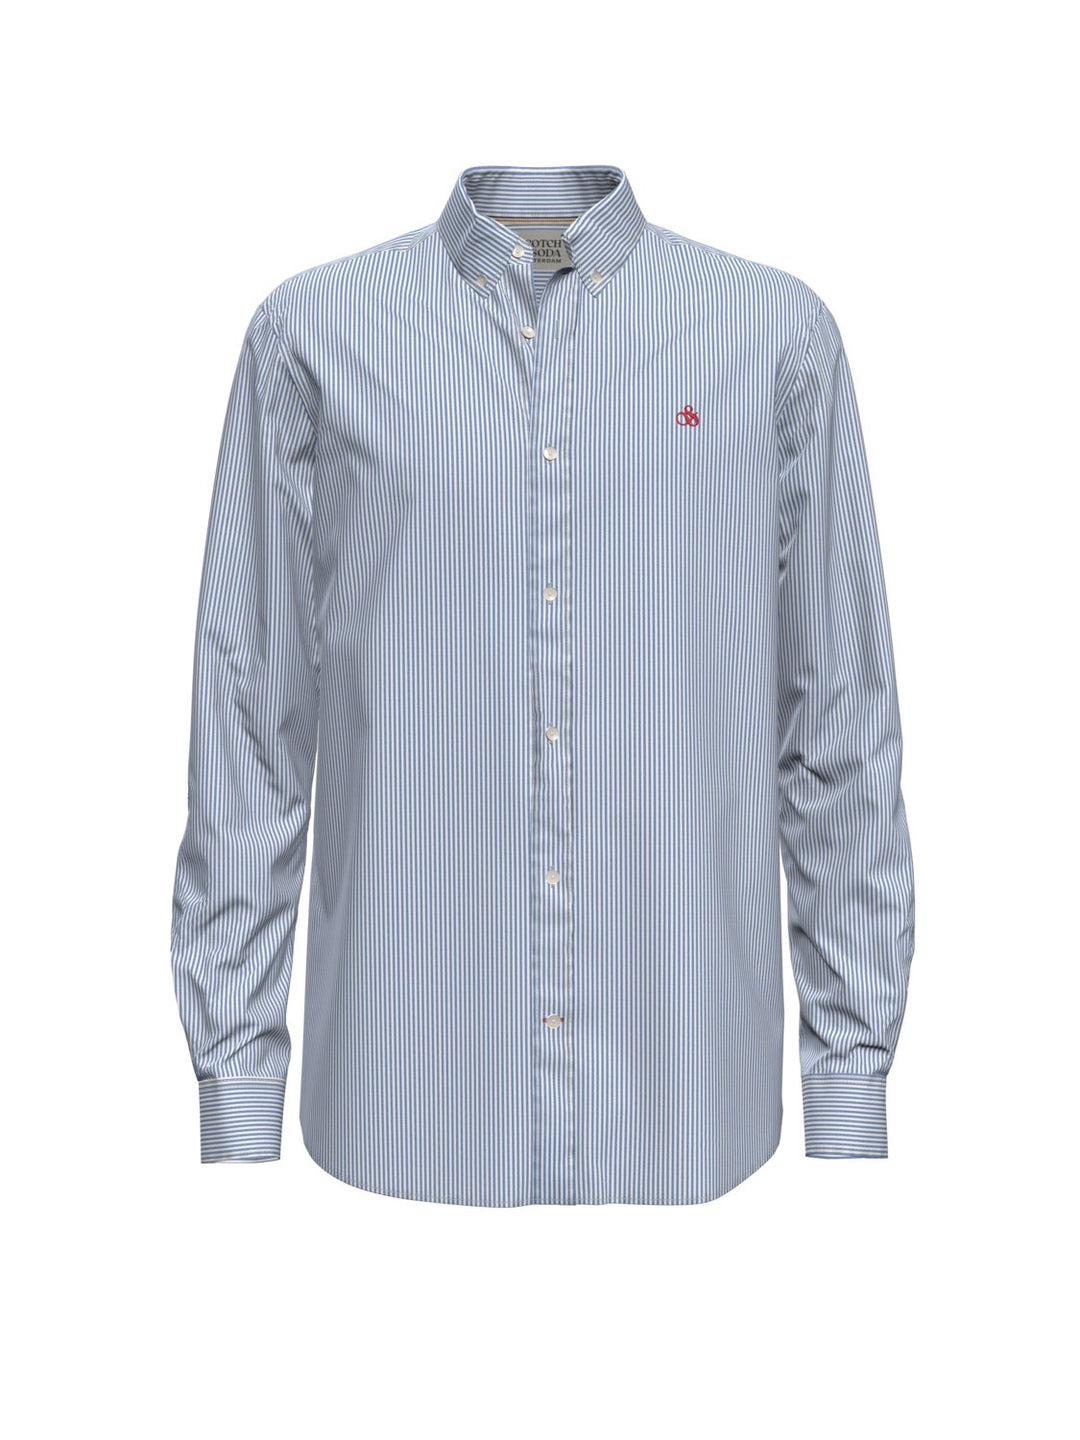 Essential Oxford Stripe Shirt in Blue Stripe | Buster McGee